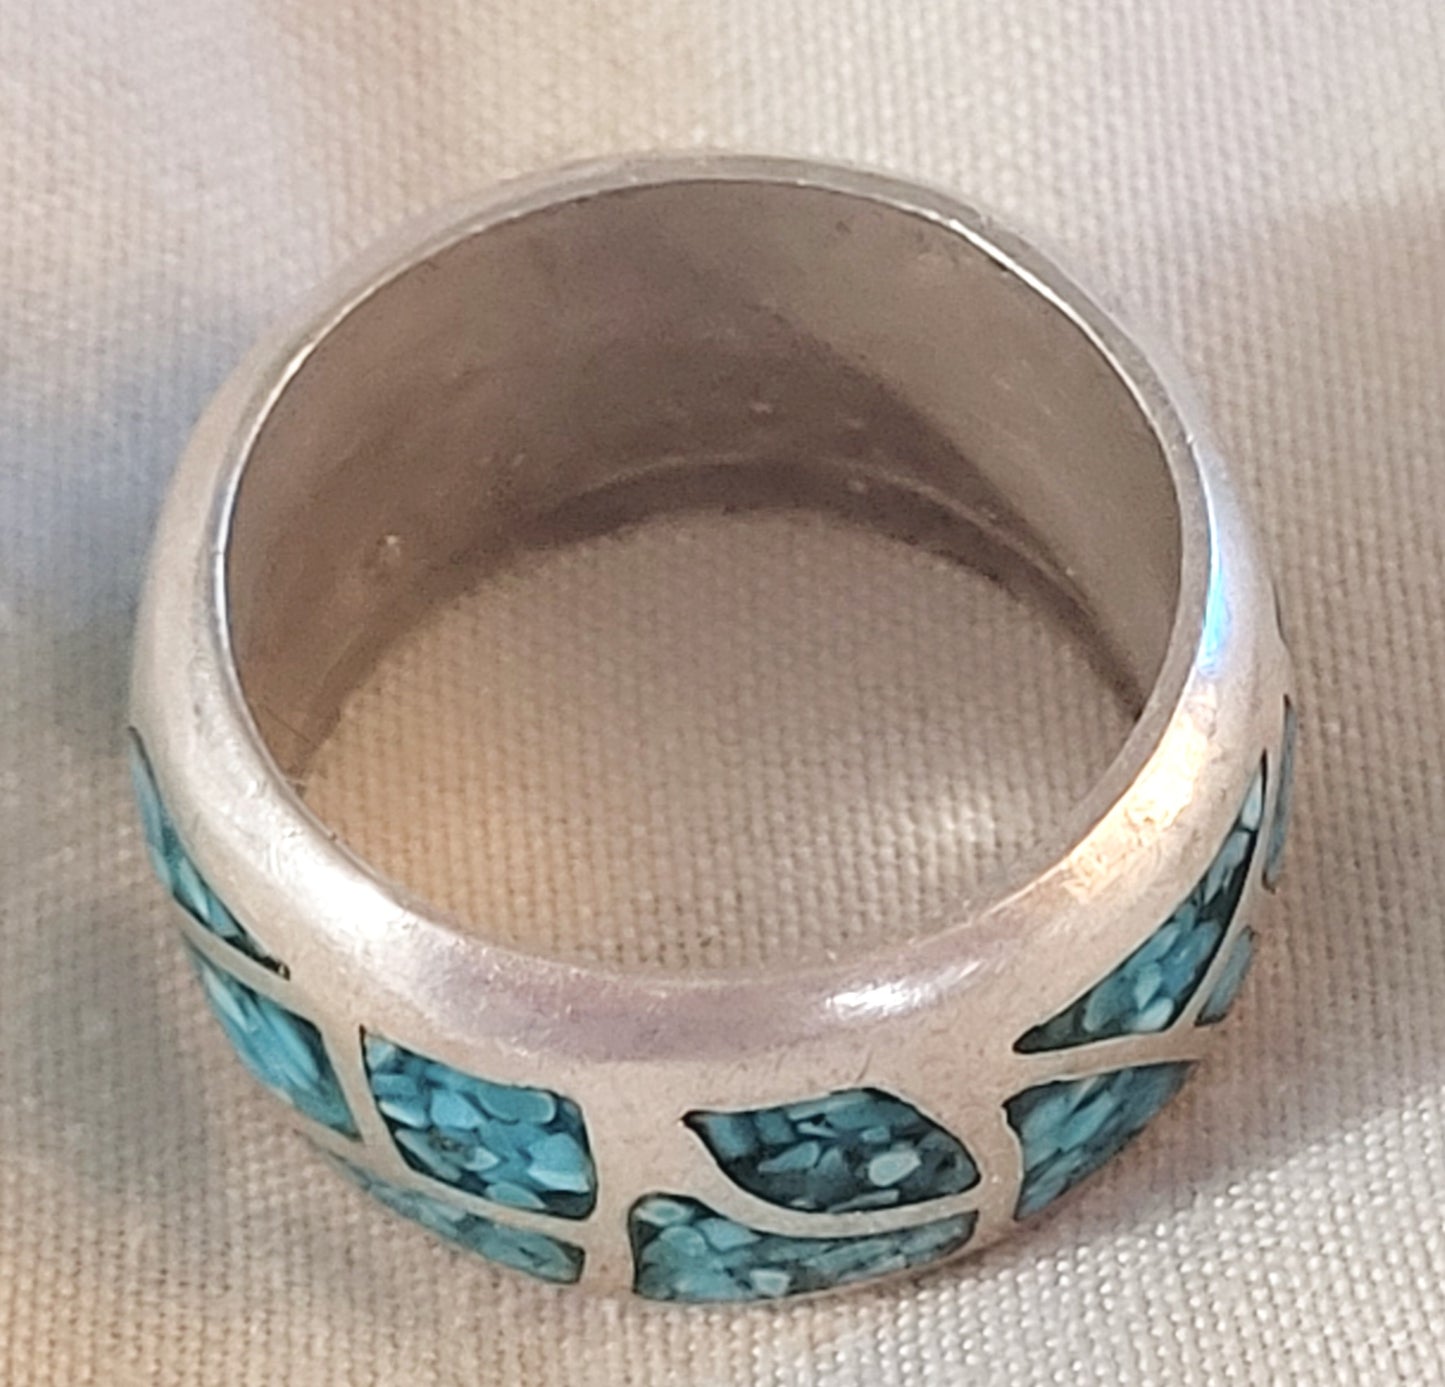 Sterling Silver SouthWestern Design w/ Turquoise Inlay (Size 7.75)